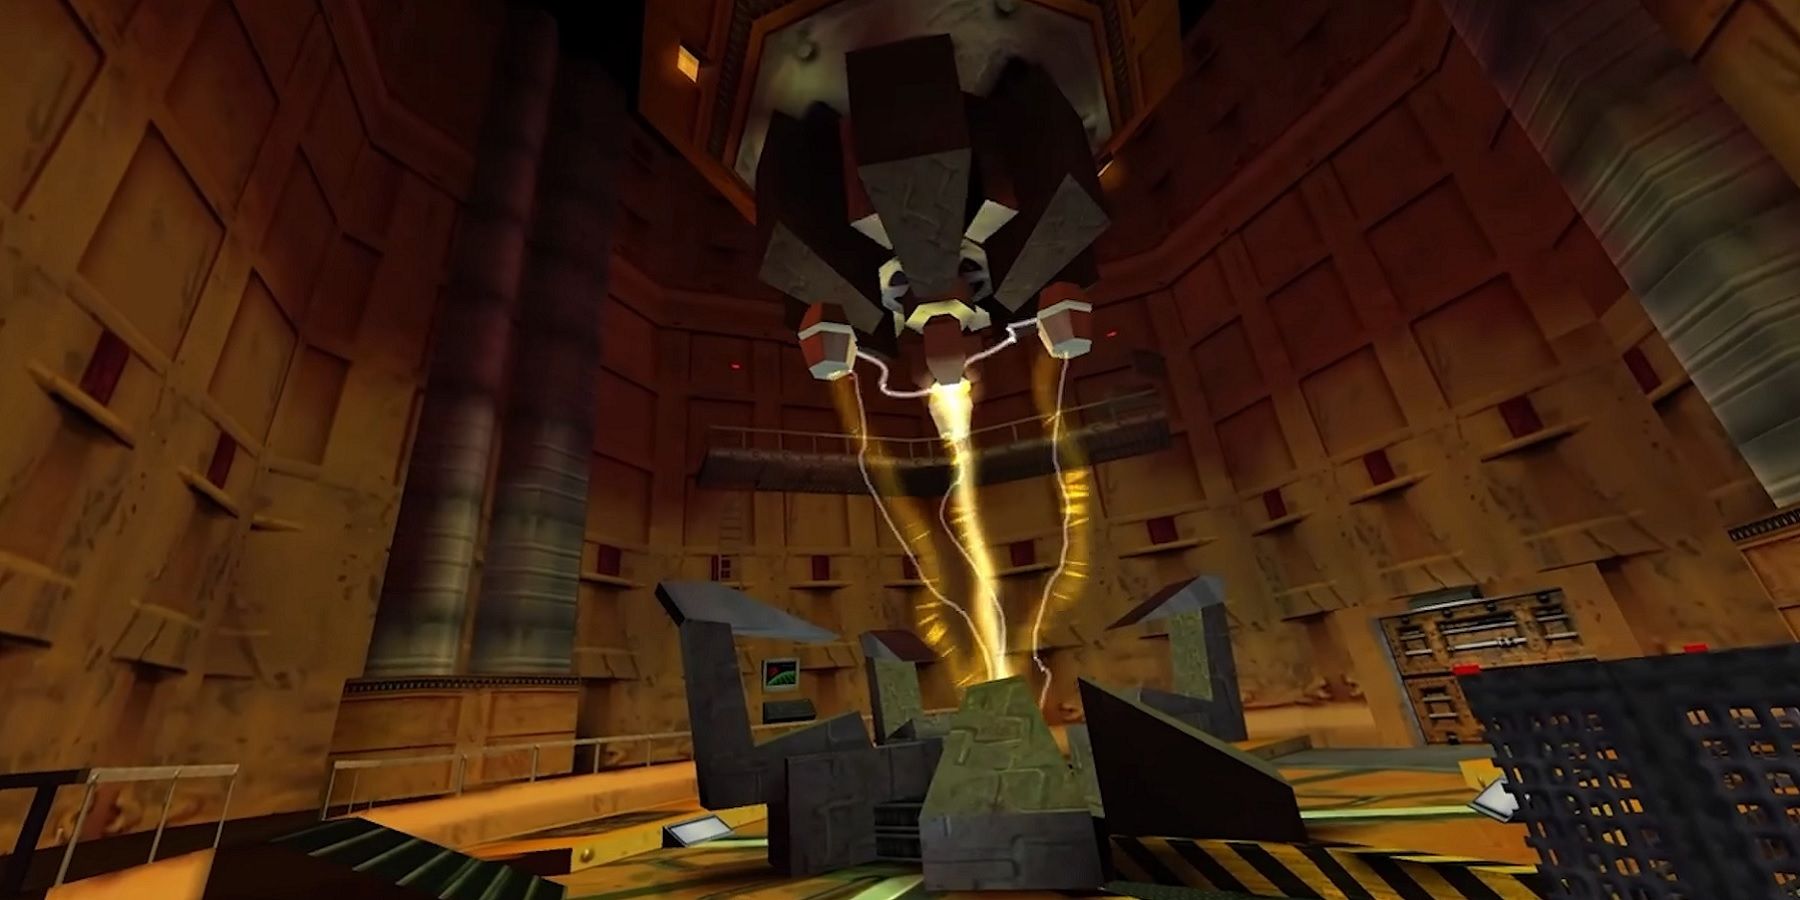 Screenshot from Half-Life showing the inside of the test chamber just before the disaster.